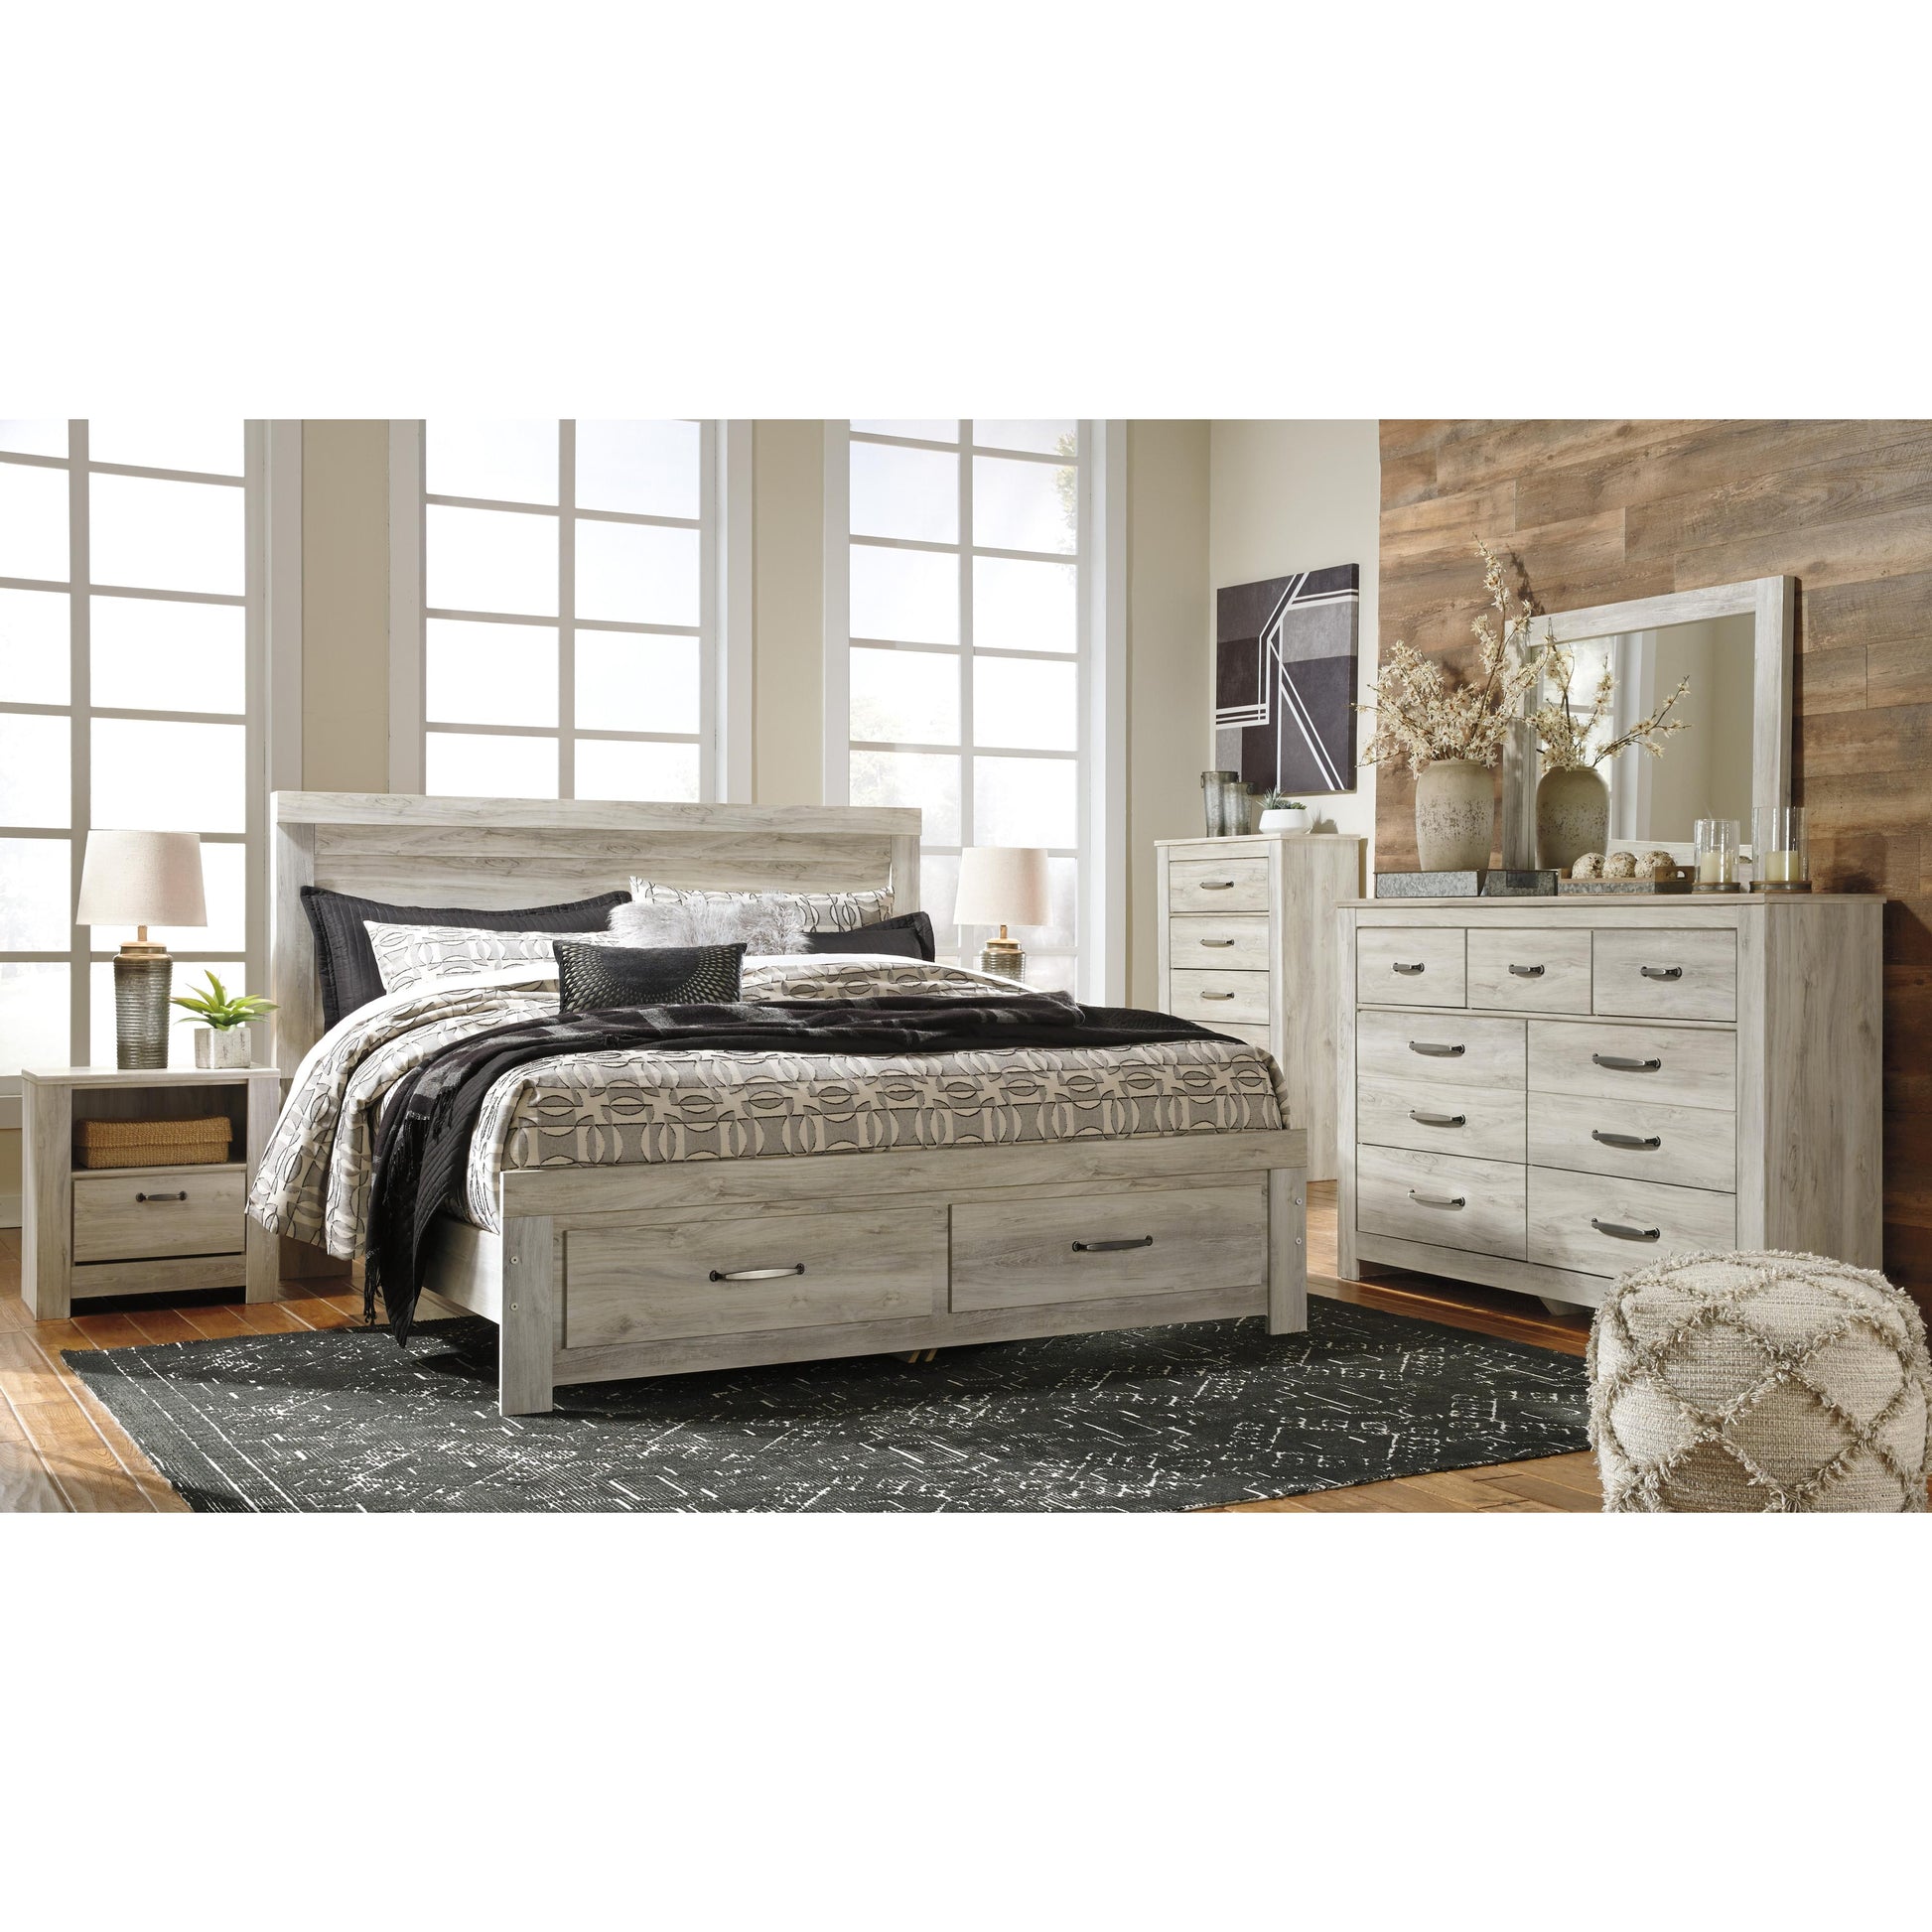 Signature Design by Ashley Bellaby King Platform Bed with Storage B331-58/B331-56S/B331-95/B100-14